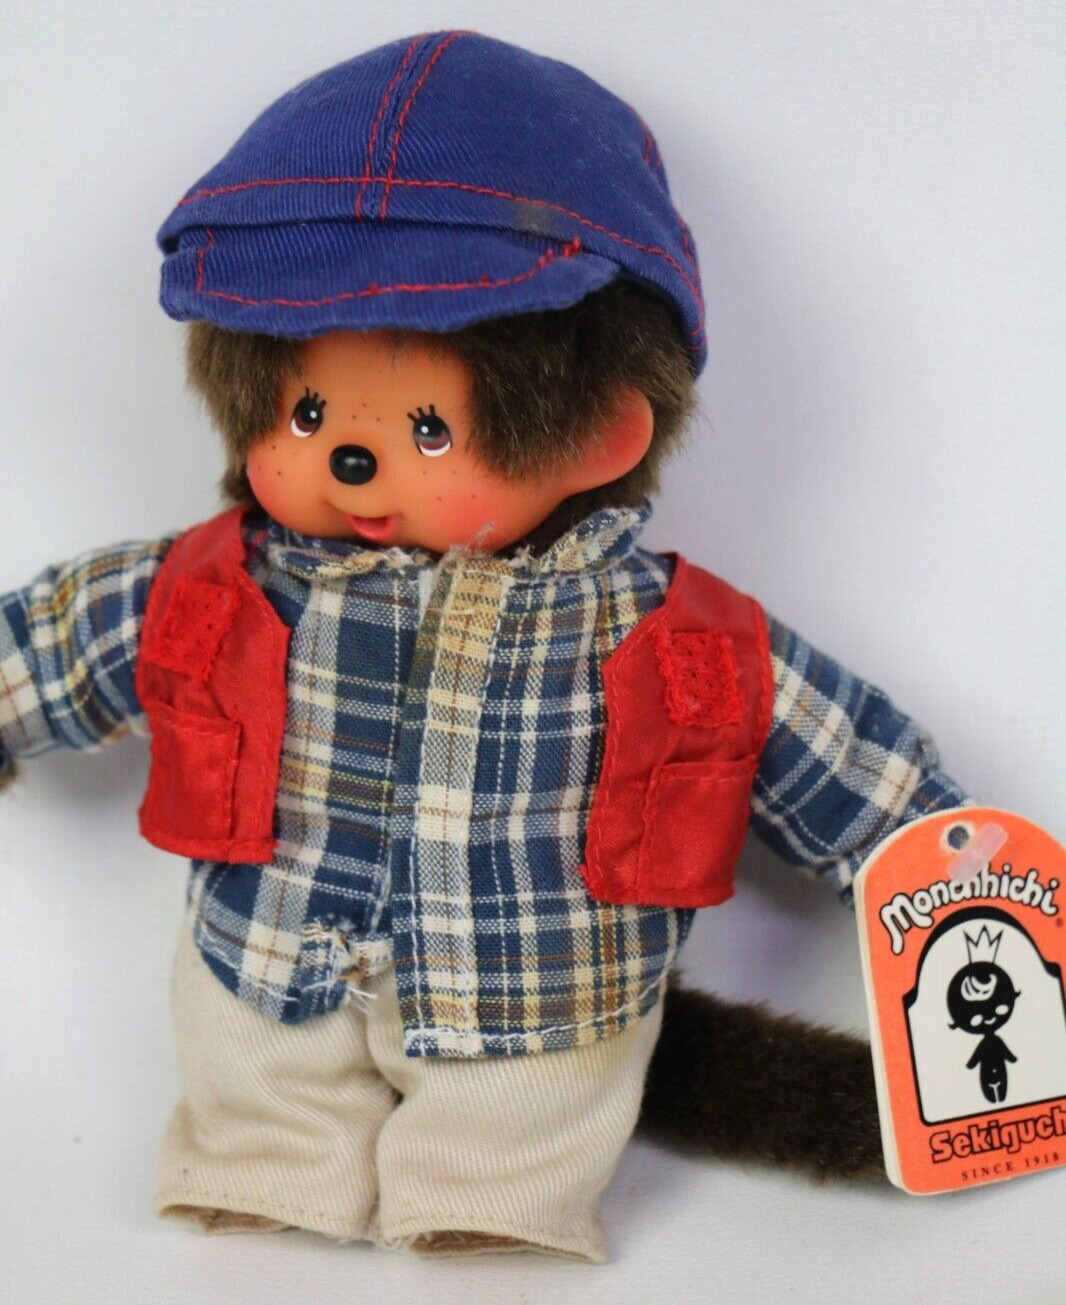 Vintage Monchhichi Sekiguchi 1970s Figure Plush with Outfit & Hat, New with Tags